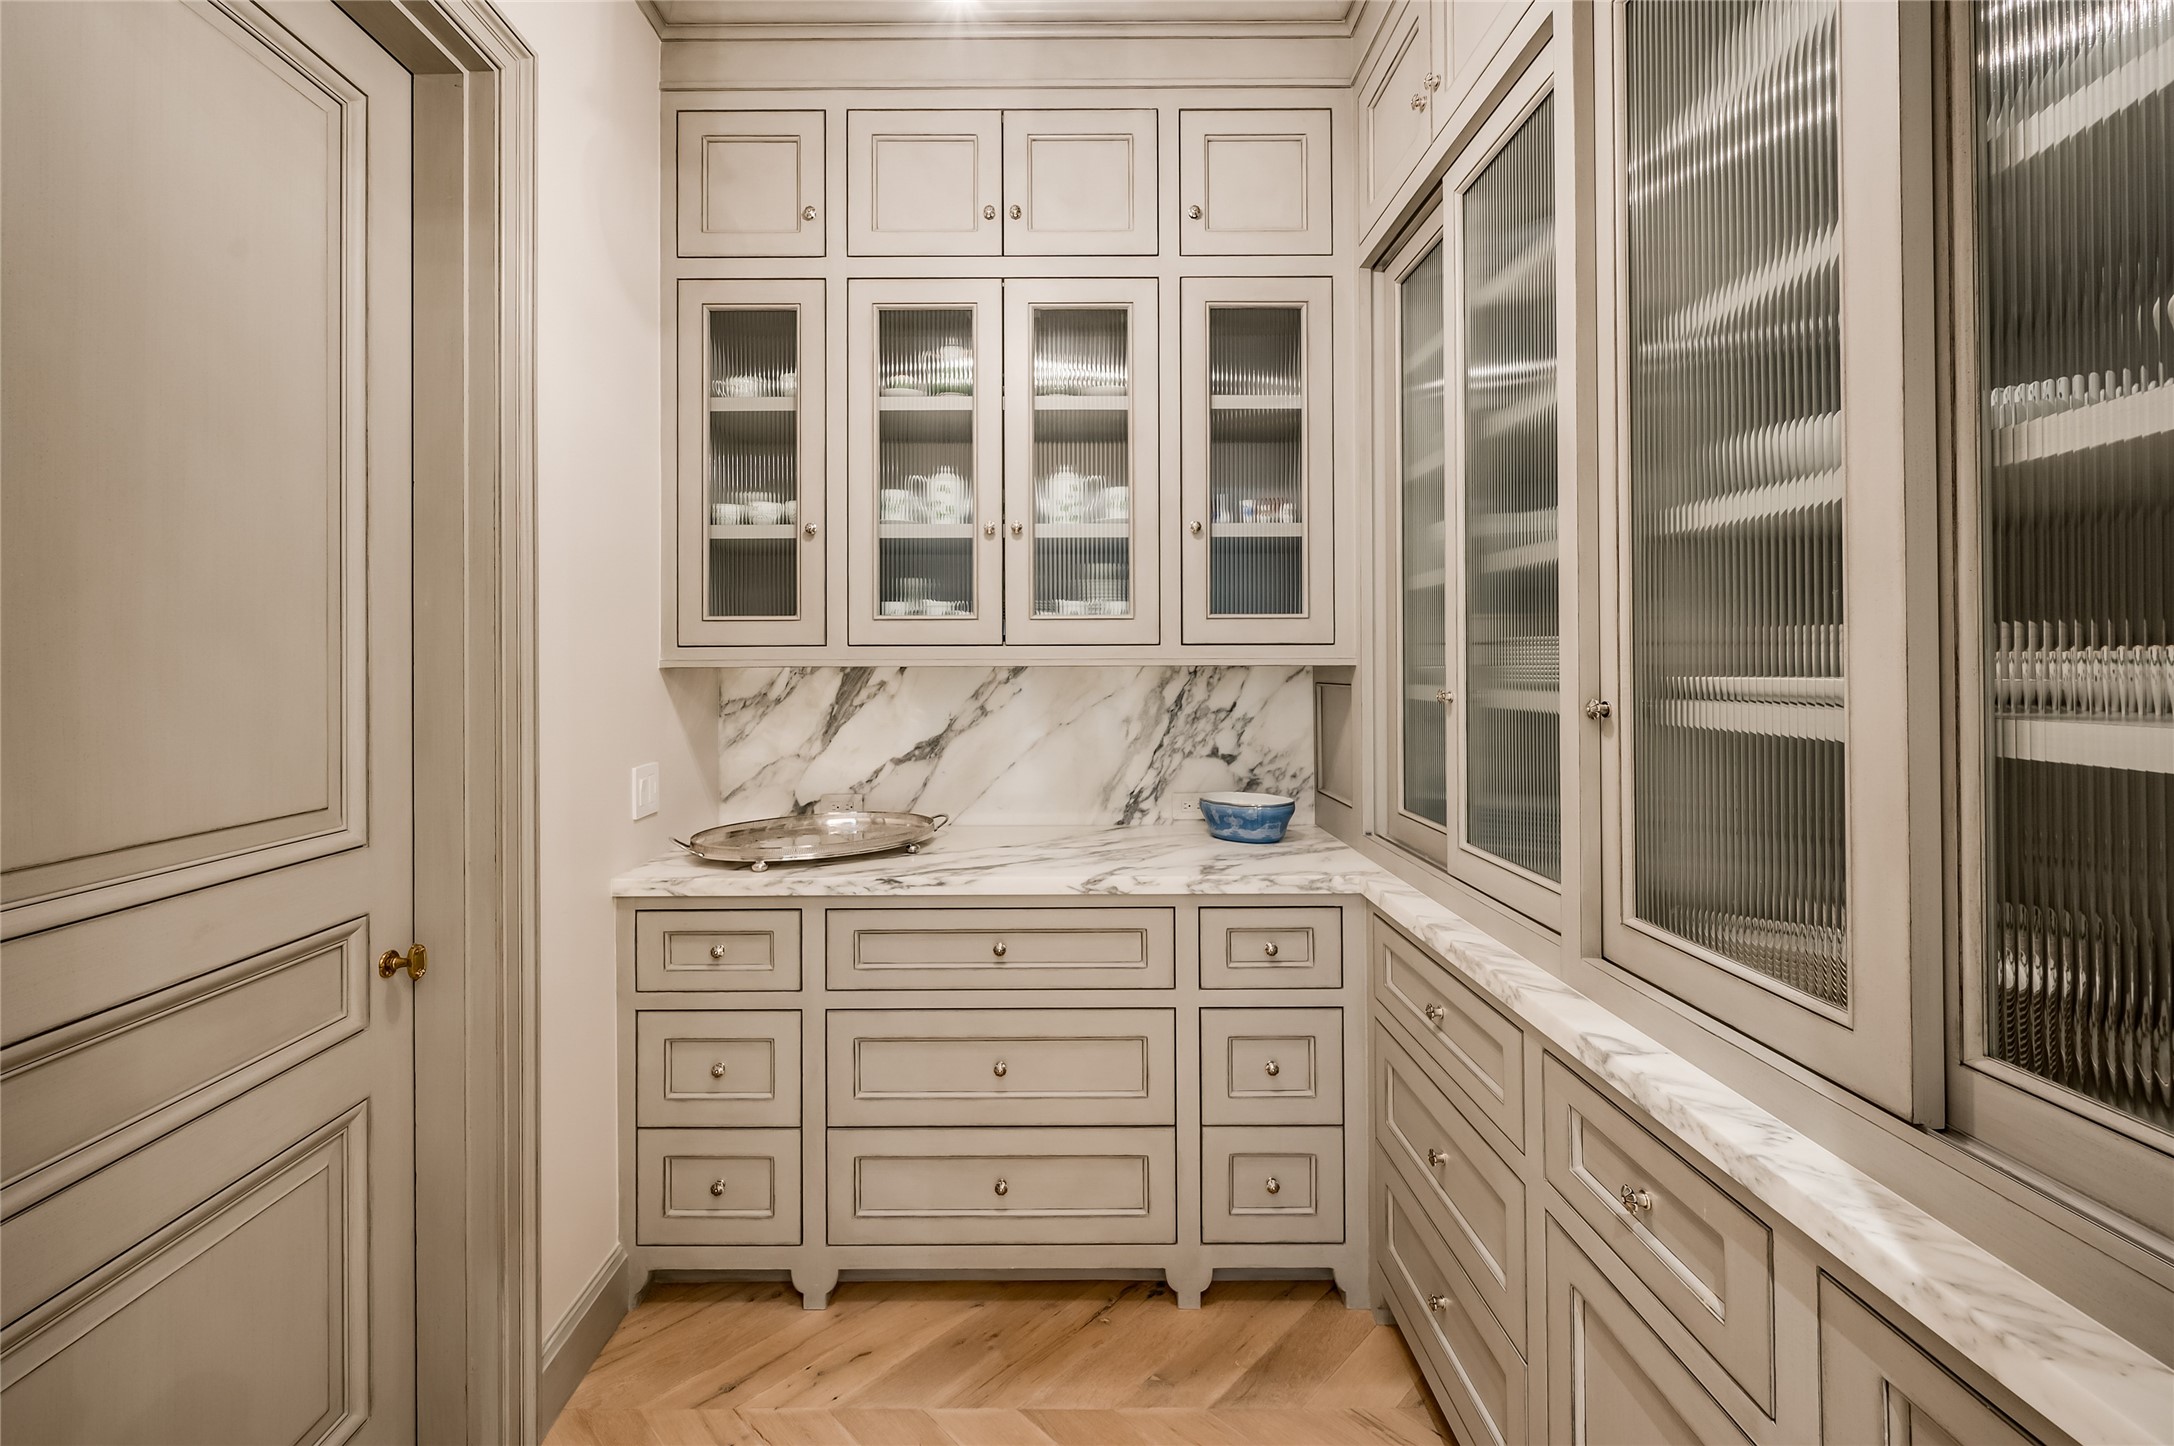 The butler's pantry with an abundance of inset cabinetry and storage.